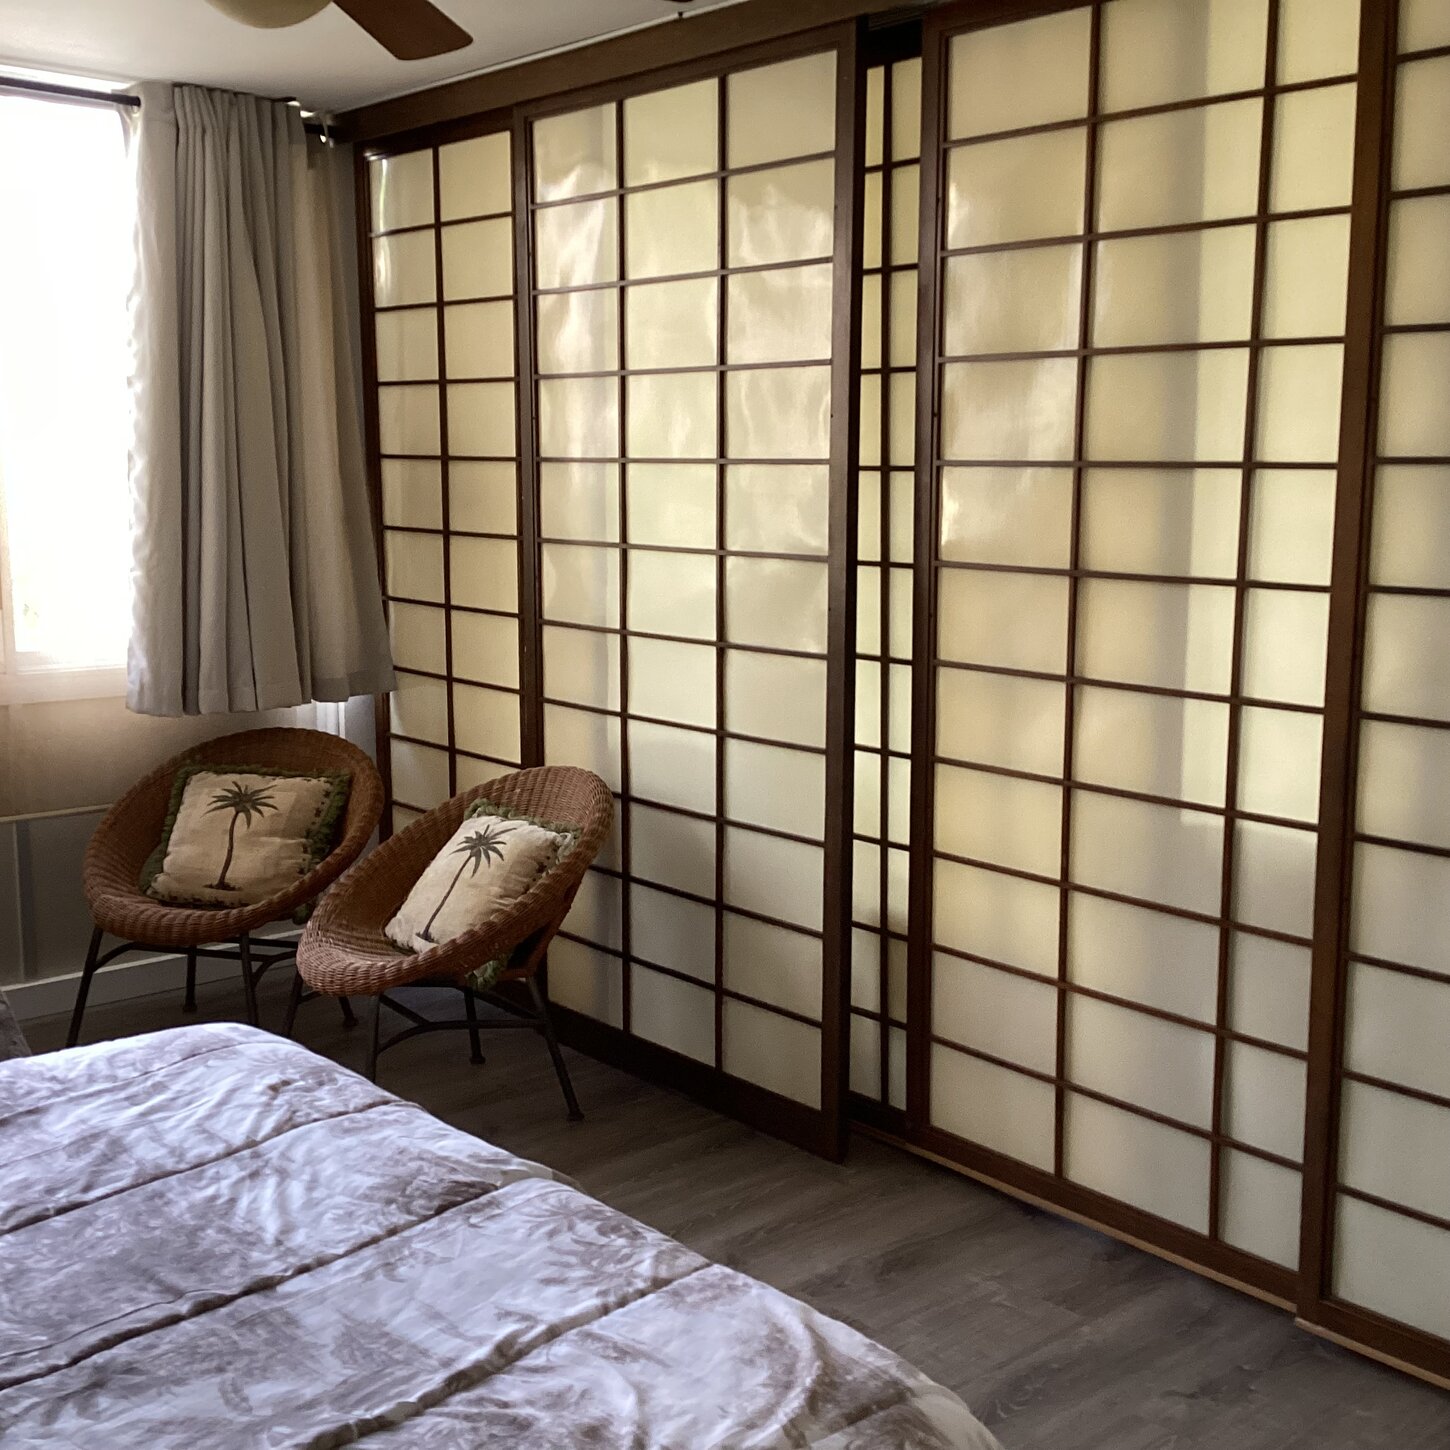 Guest bedroom with Shoji doors closed for privacy